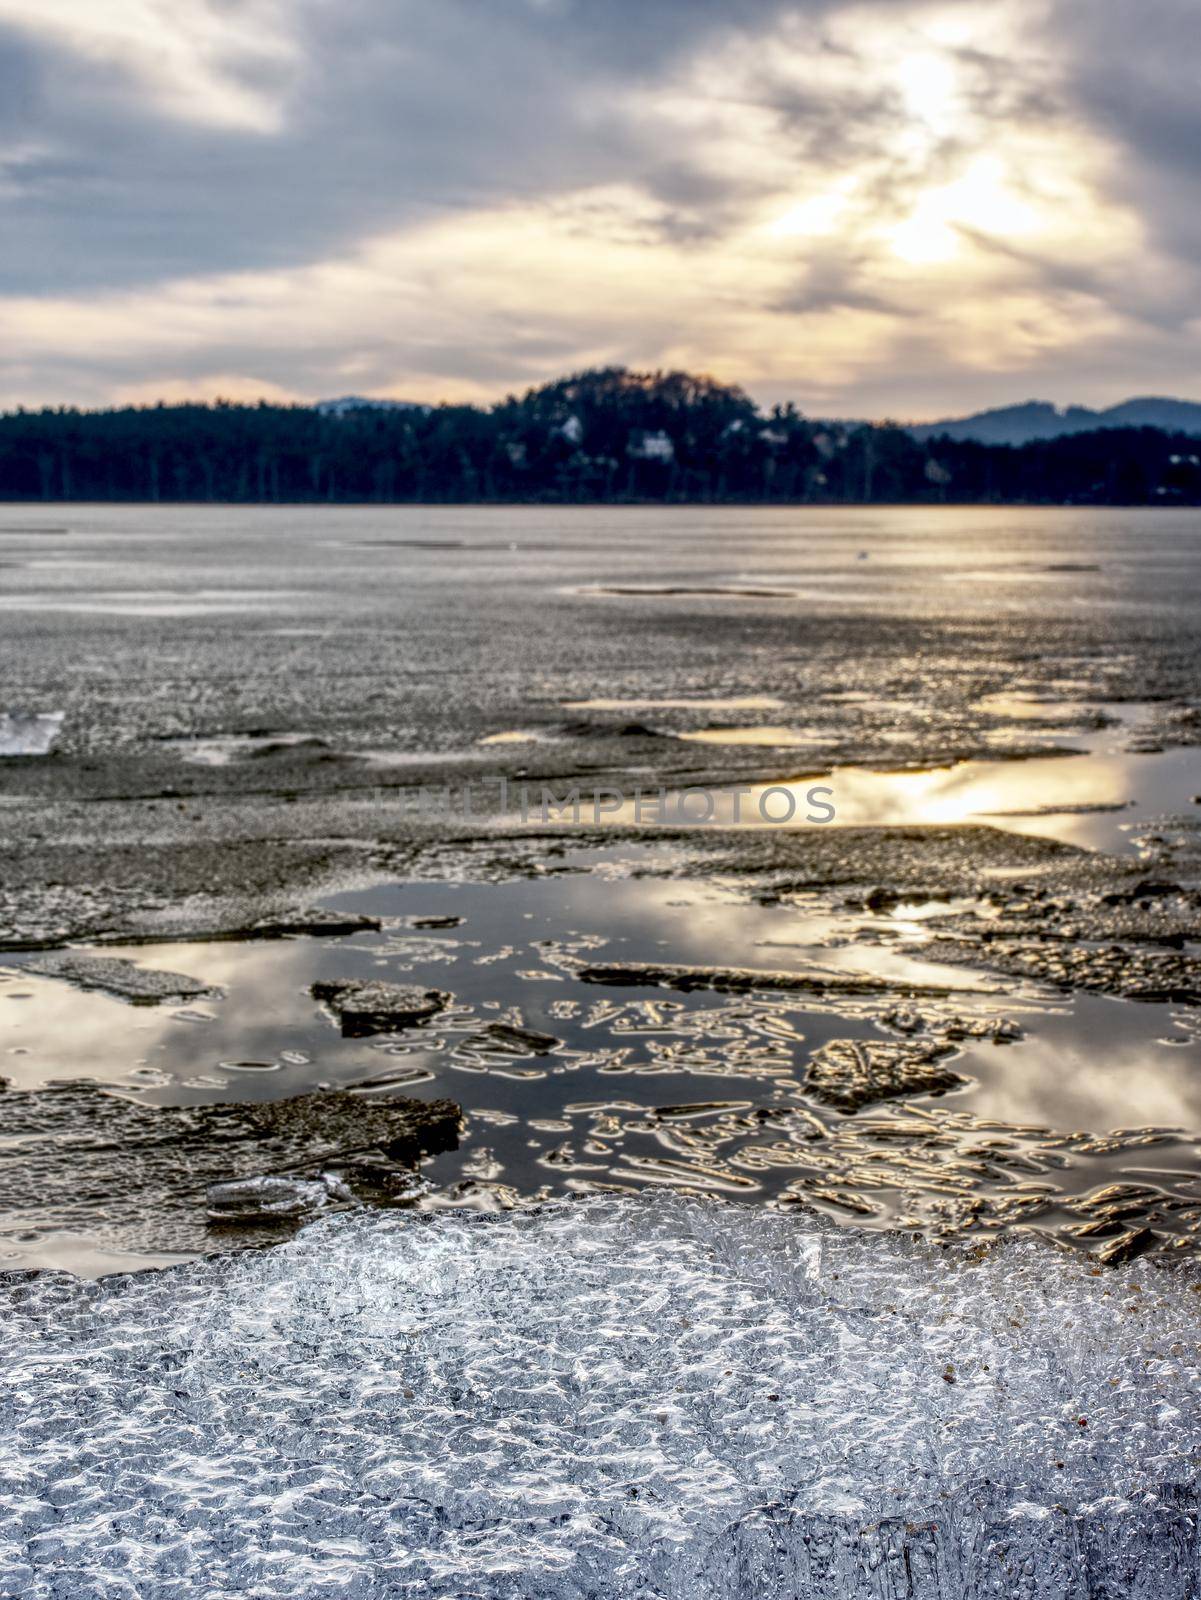 Exposed shore under melting ice. Close up view to border between ice and dark water.  by rdonar2